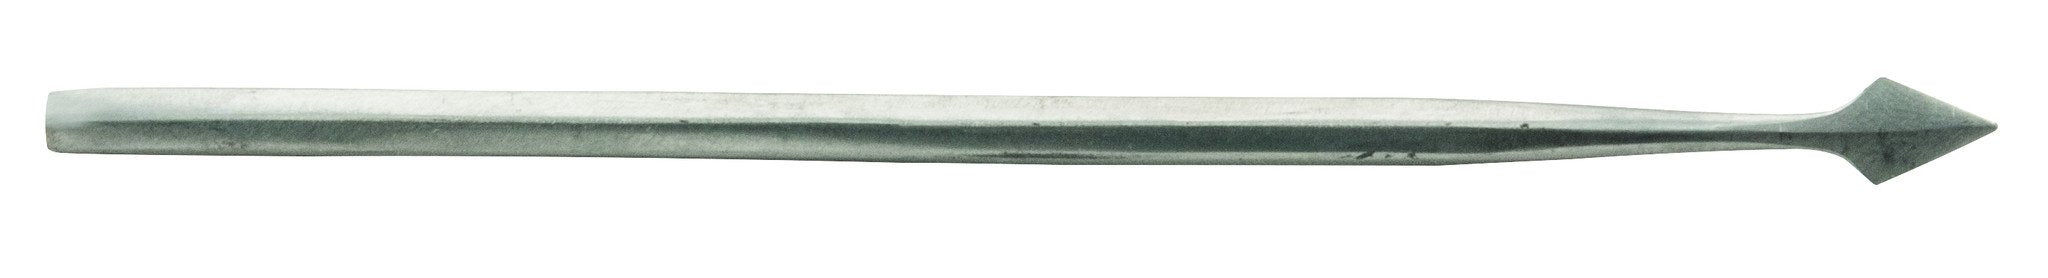 Dissection Needle, 4 Inch - With Arrow - Stainless Steel